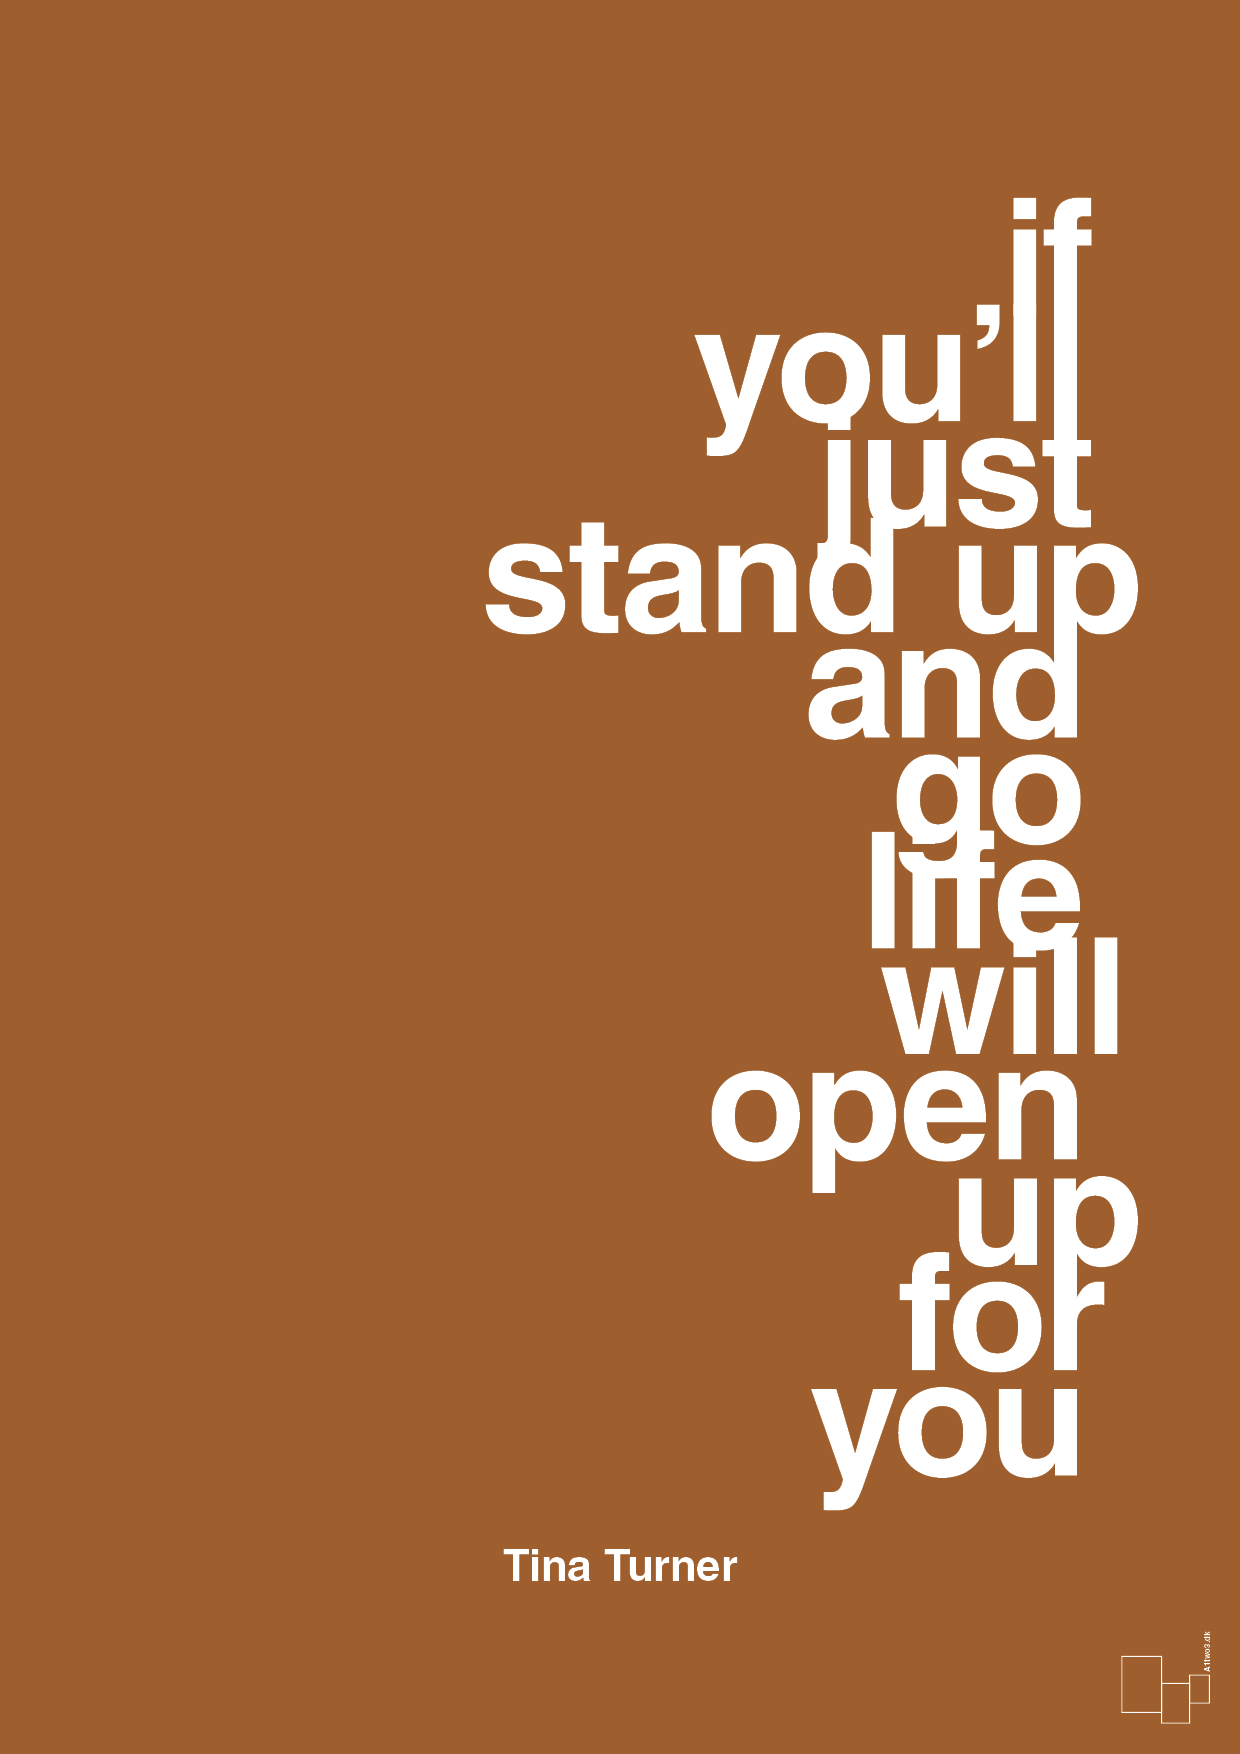 if you’ll just stand up and go life will open up for you - Plakat med Citater i Cognac